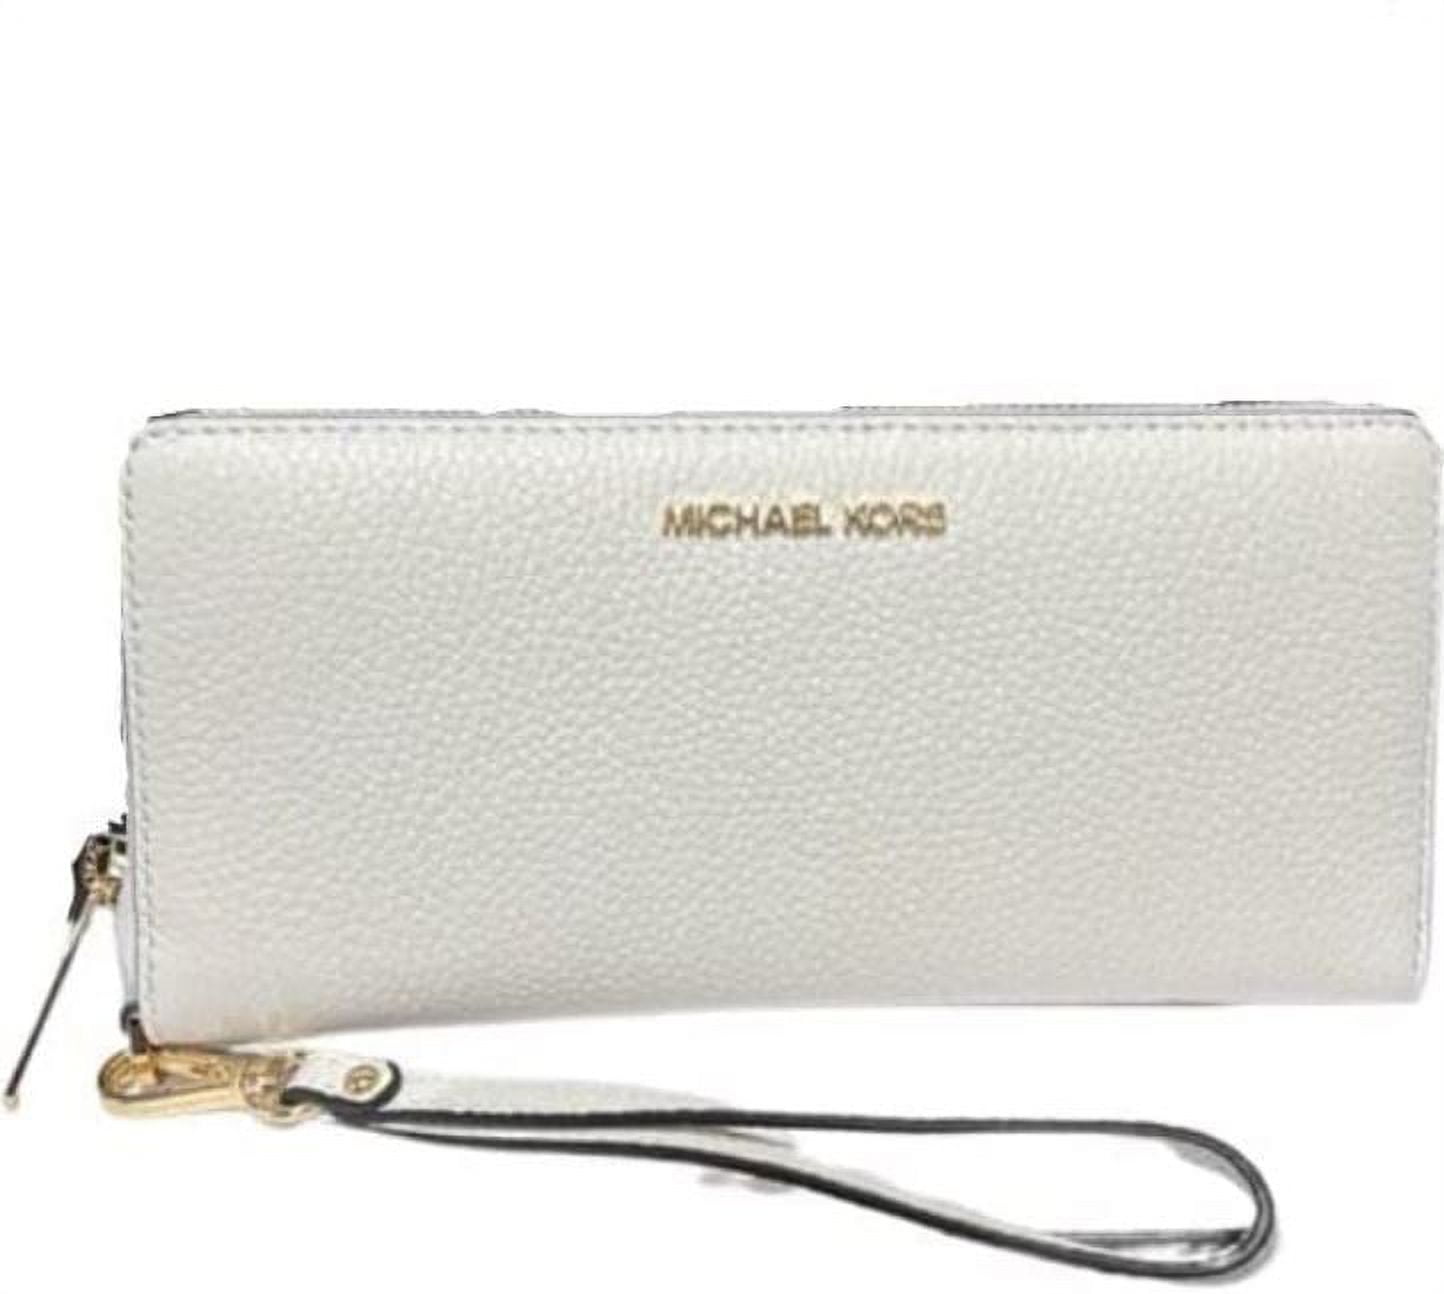 Micheal Kors Wallet Clutch for Apple IPhone  Micheal kors wallet, Michael  kors accessories, Clutch wallet